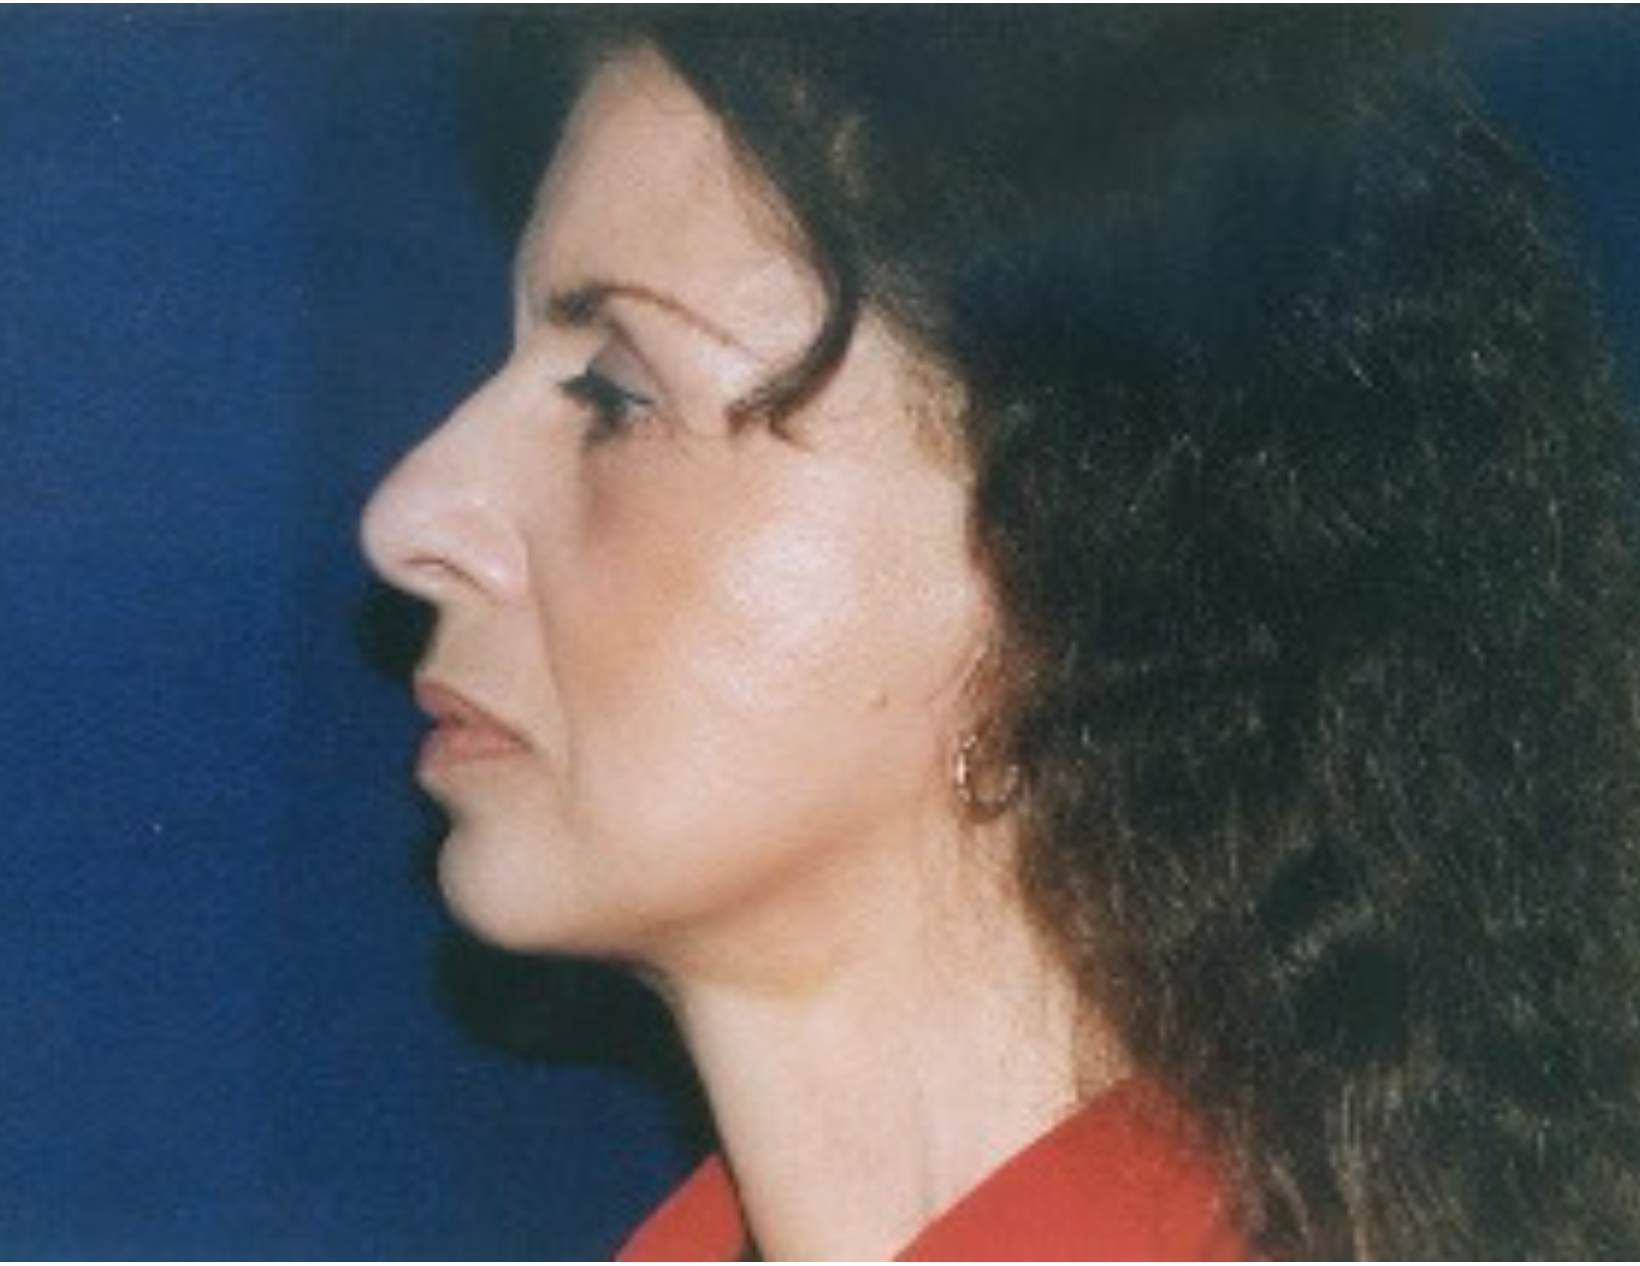 A woman with long hair is wearing a red shirt and earrings.